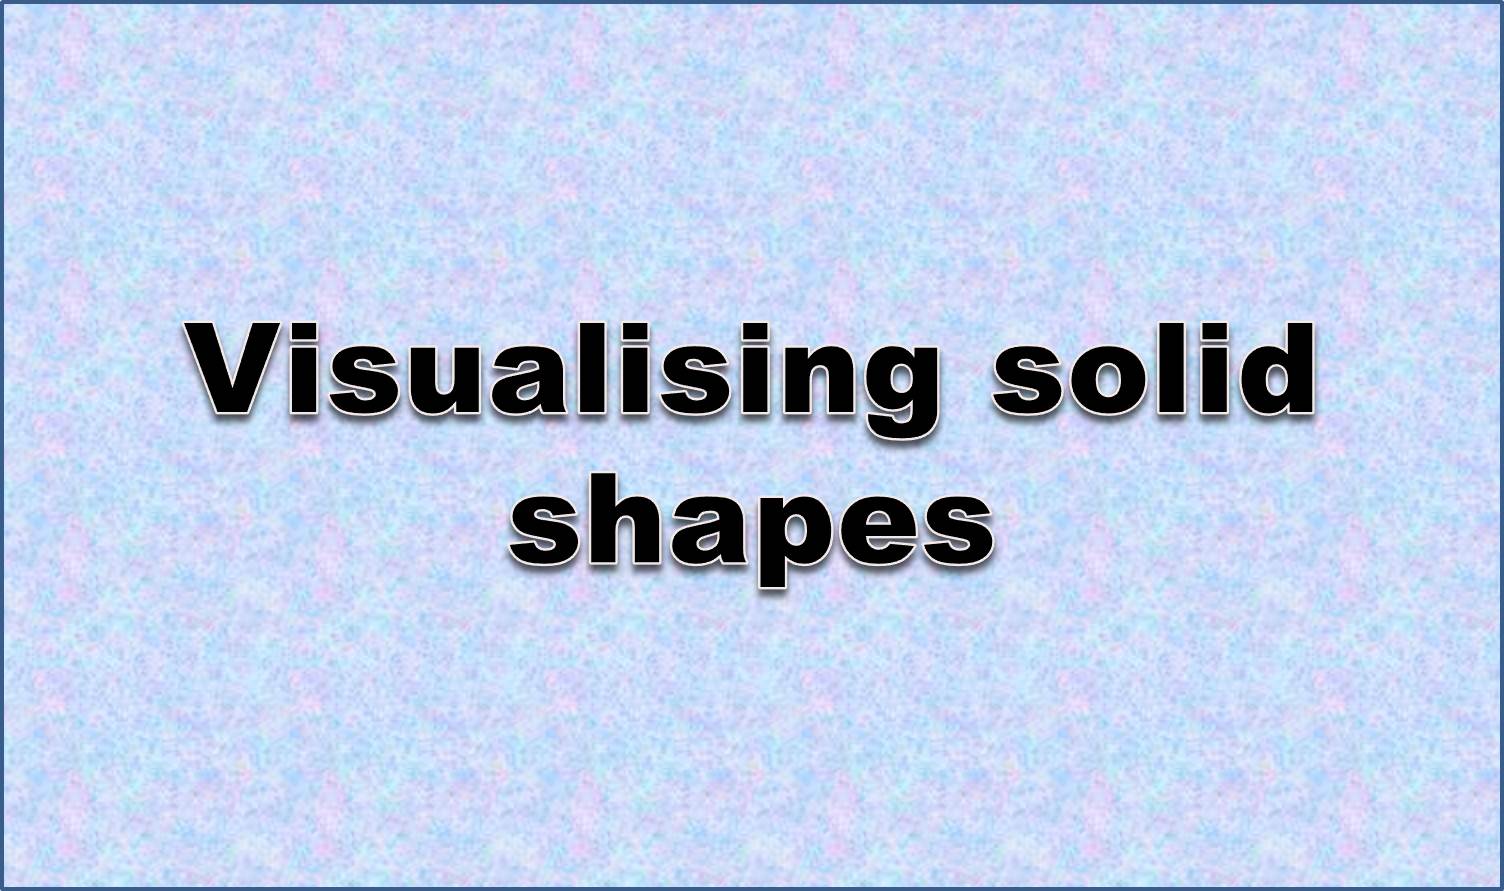 http://study.aisectonline.com/images/Making a scale drawing.jpg